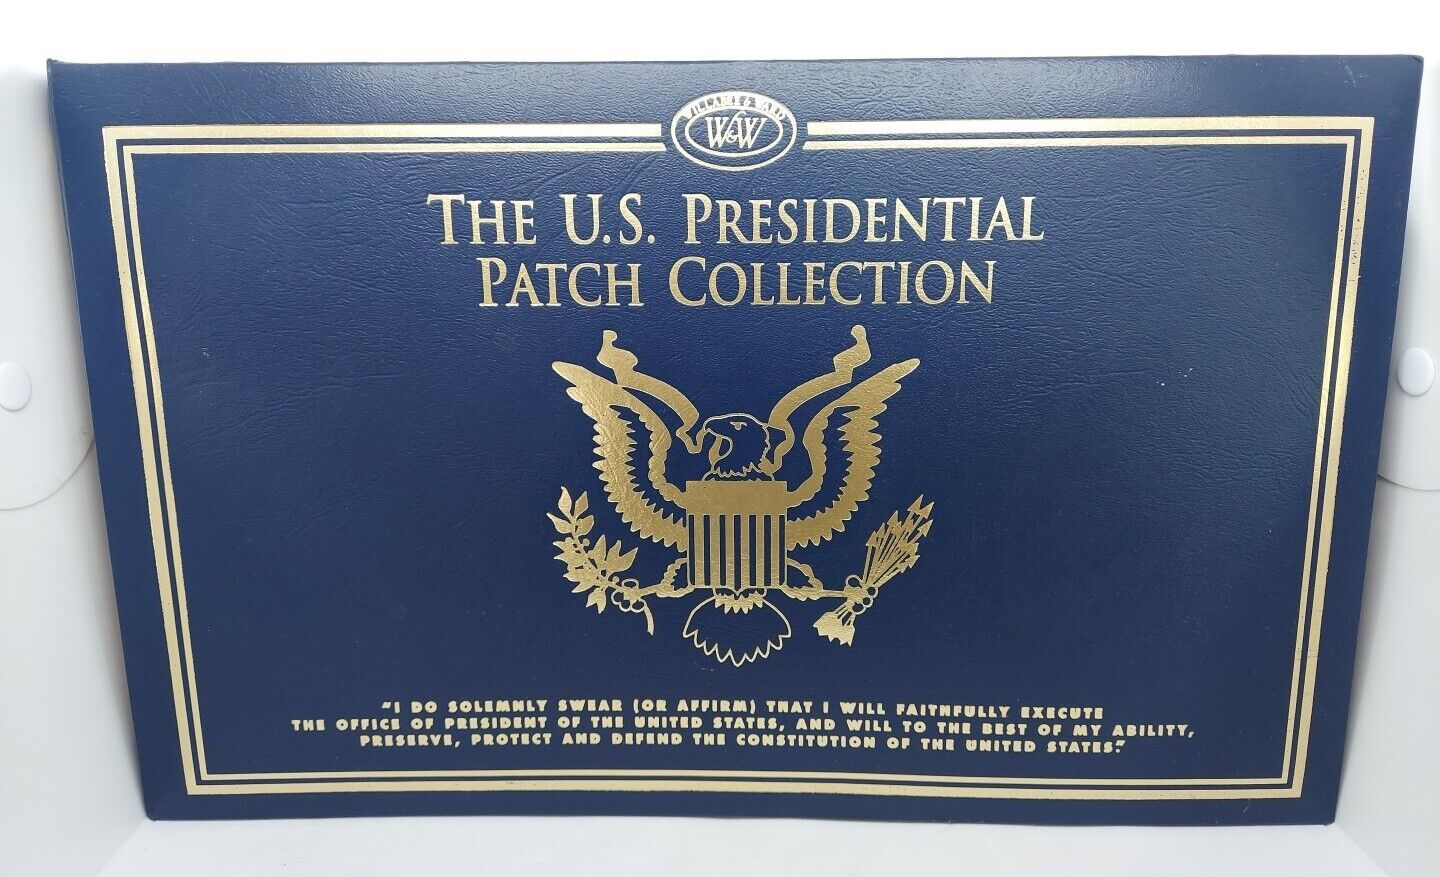 The U.S. Presidential Patch Collection by Willabee & Ward - 21 Patches + Binder